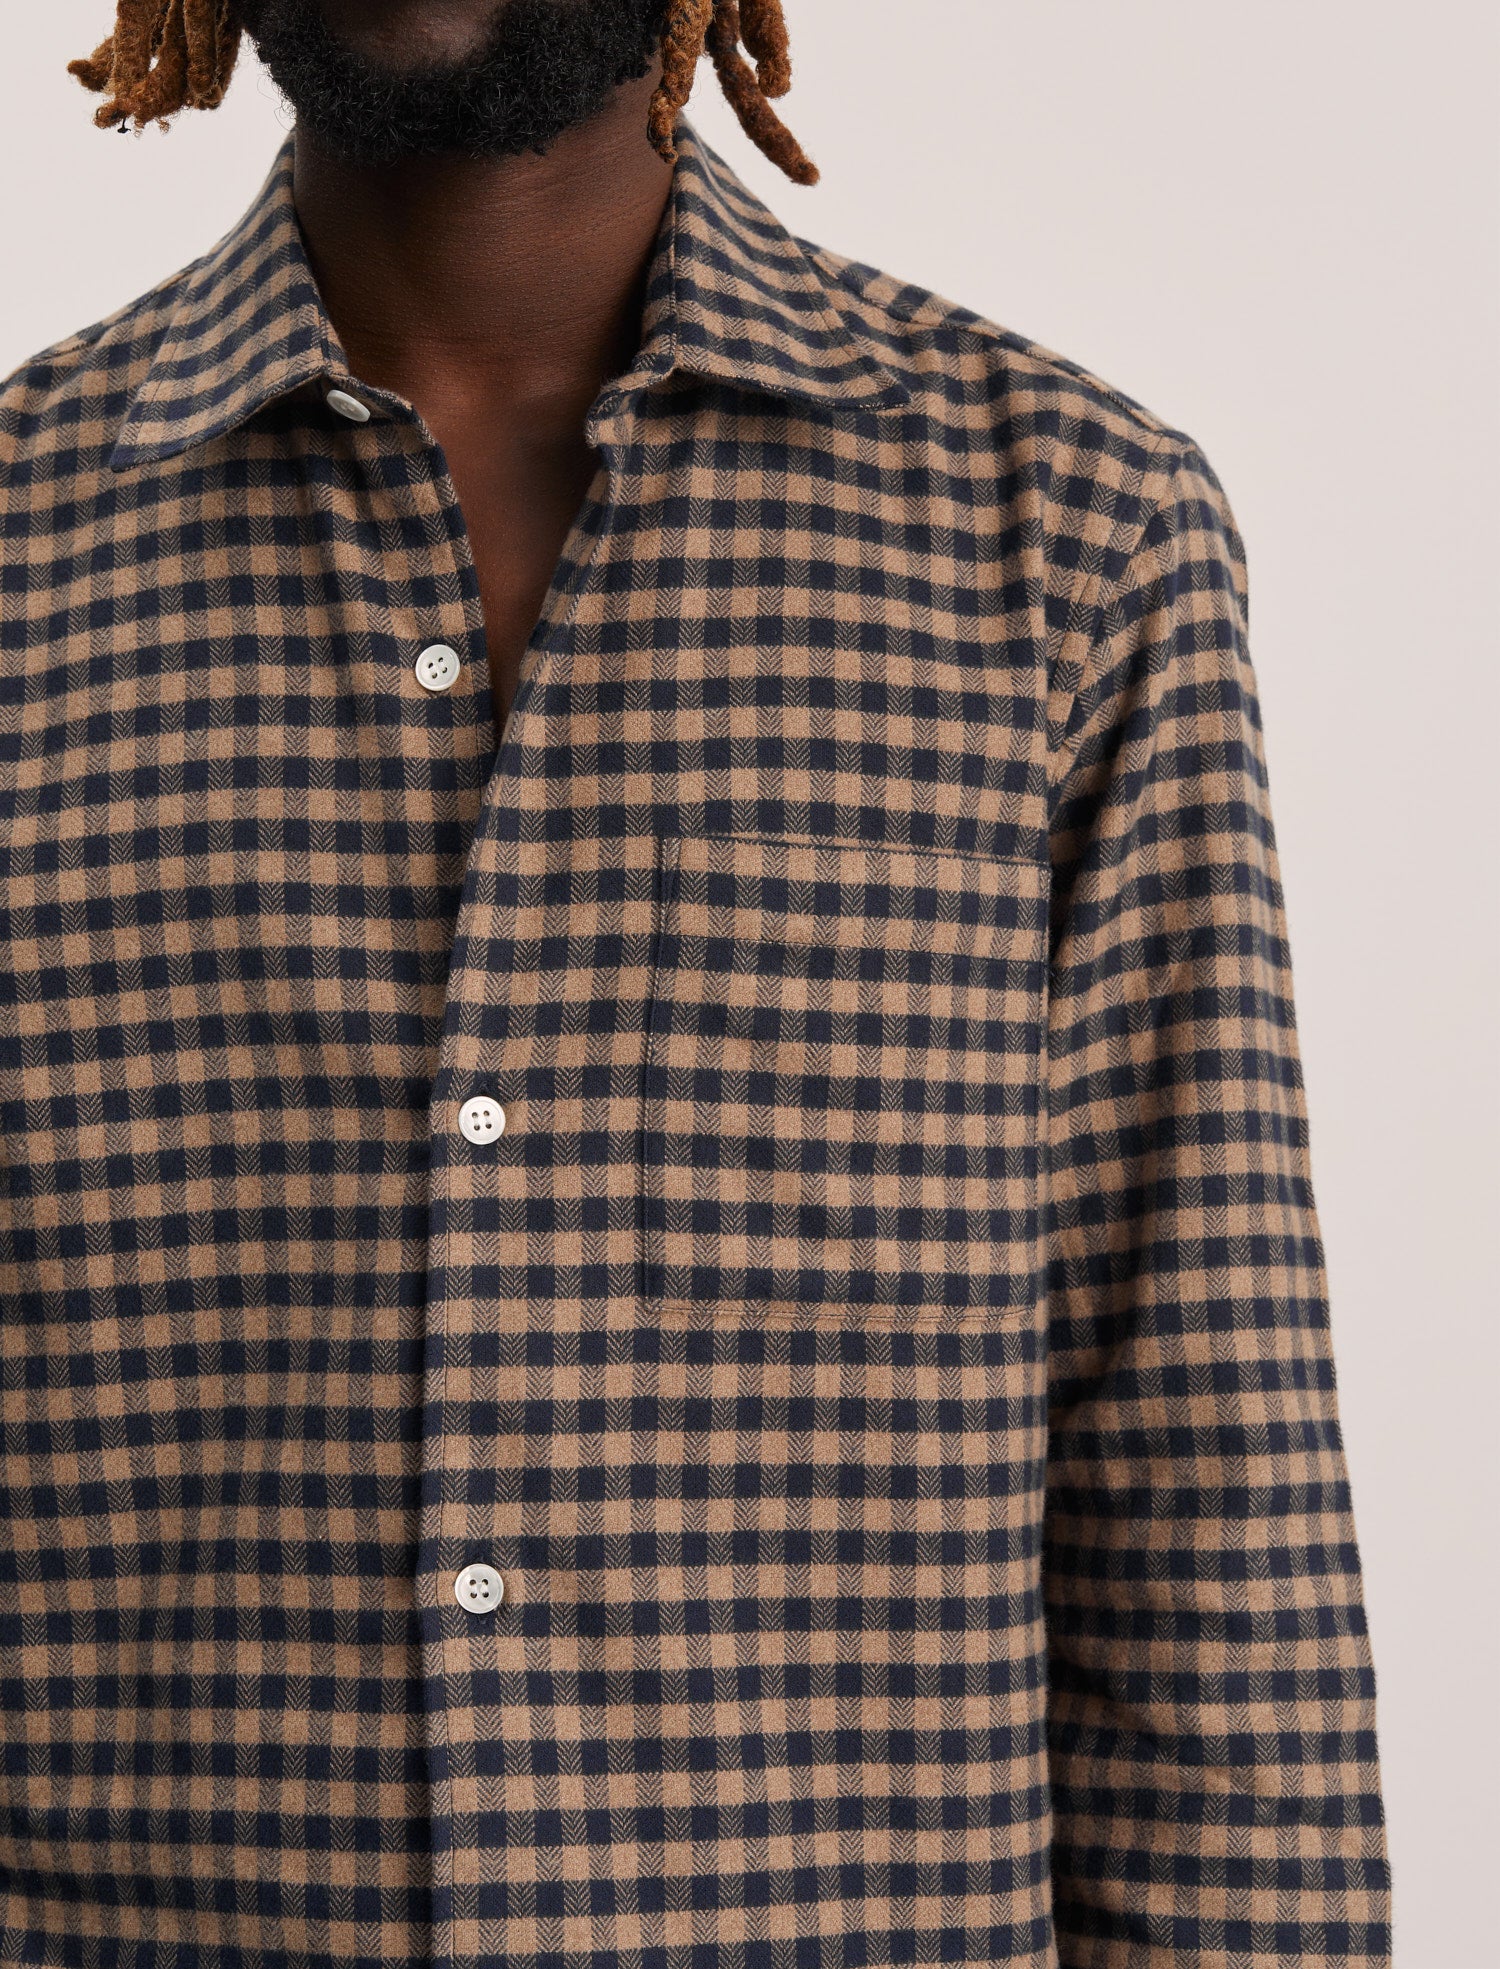 ANOTHER Shirt 4.0, Navy Check